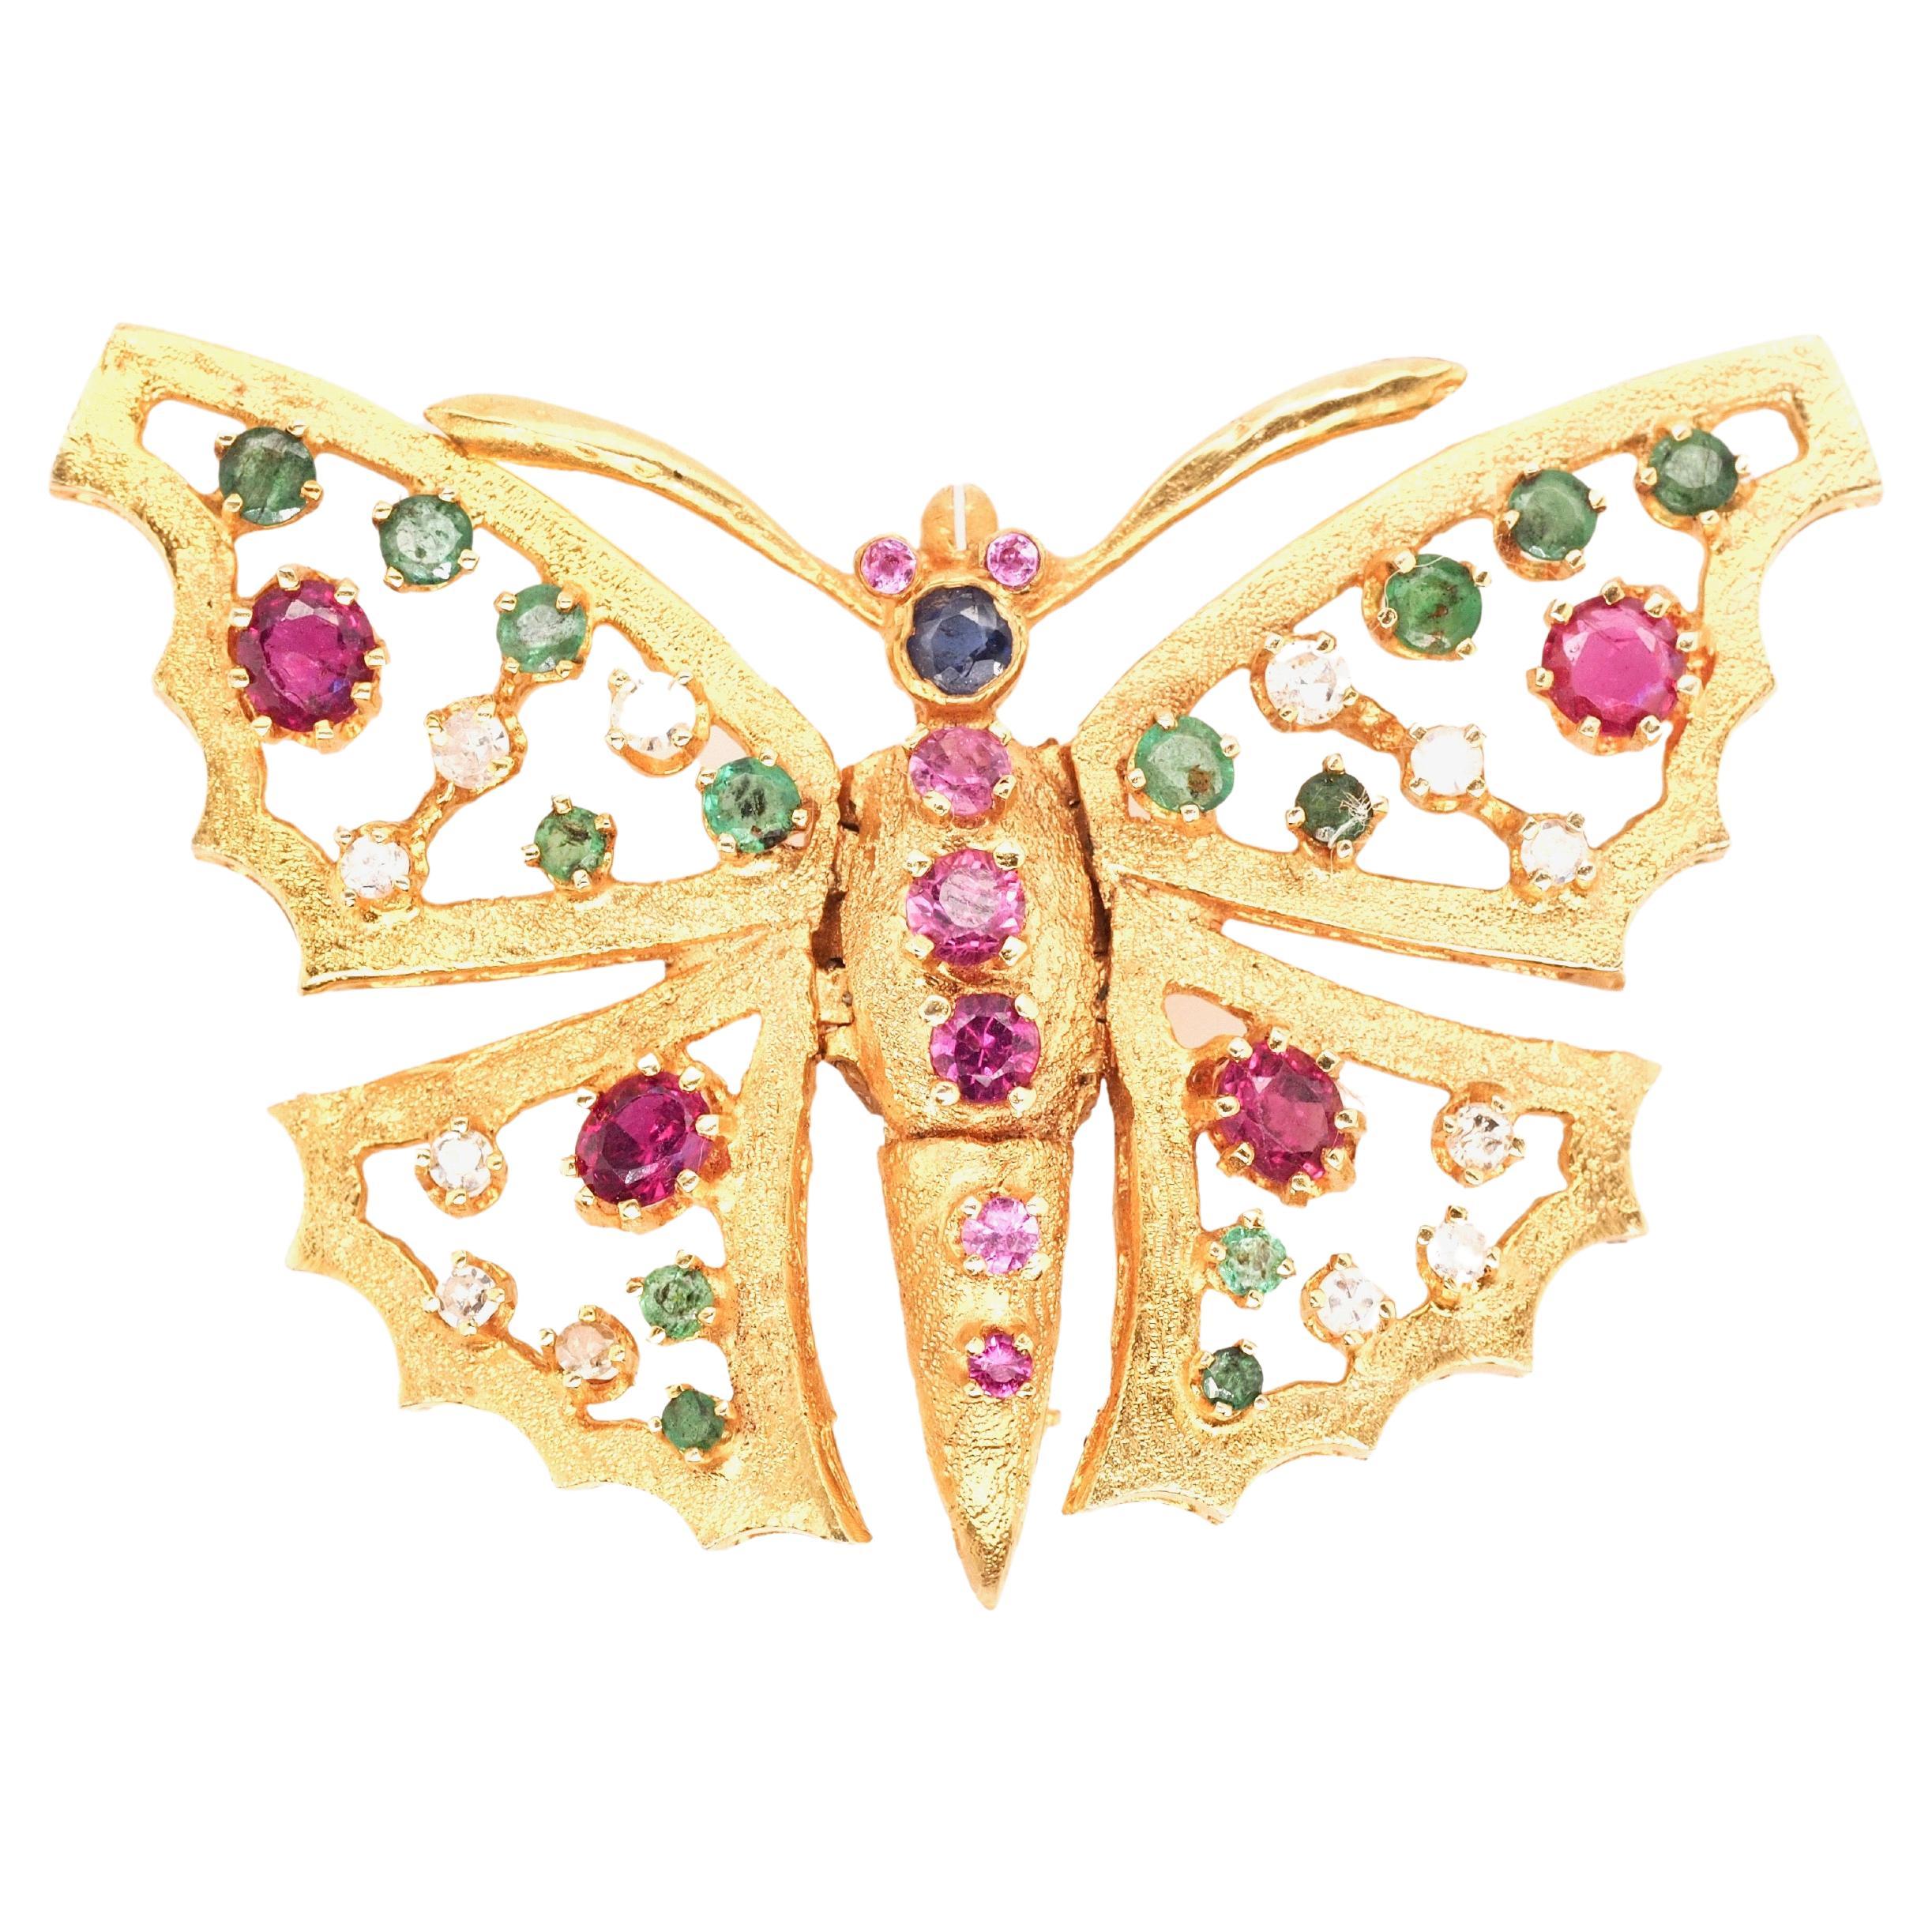 14K Yellow Gold Butterfly Brooch with Hinged Wings and Diamonds, Rubies, Emerald For Sale